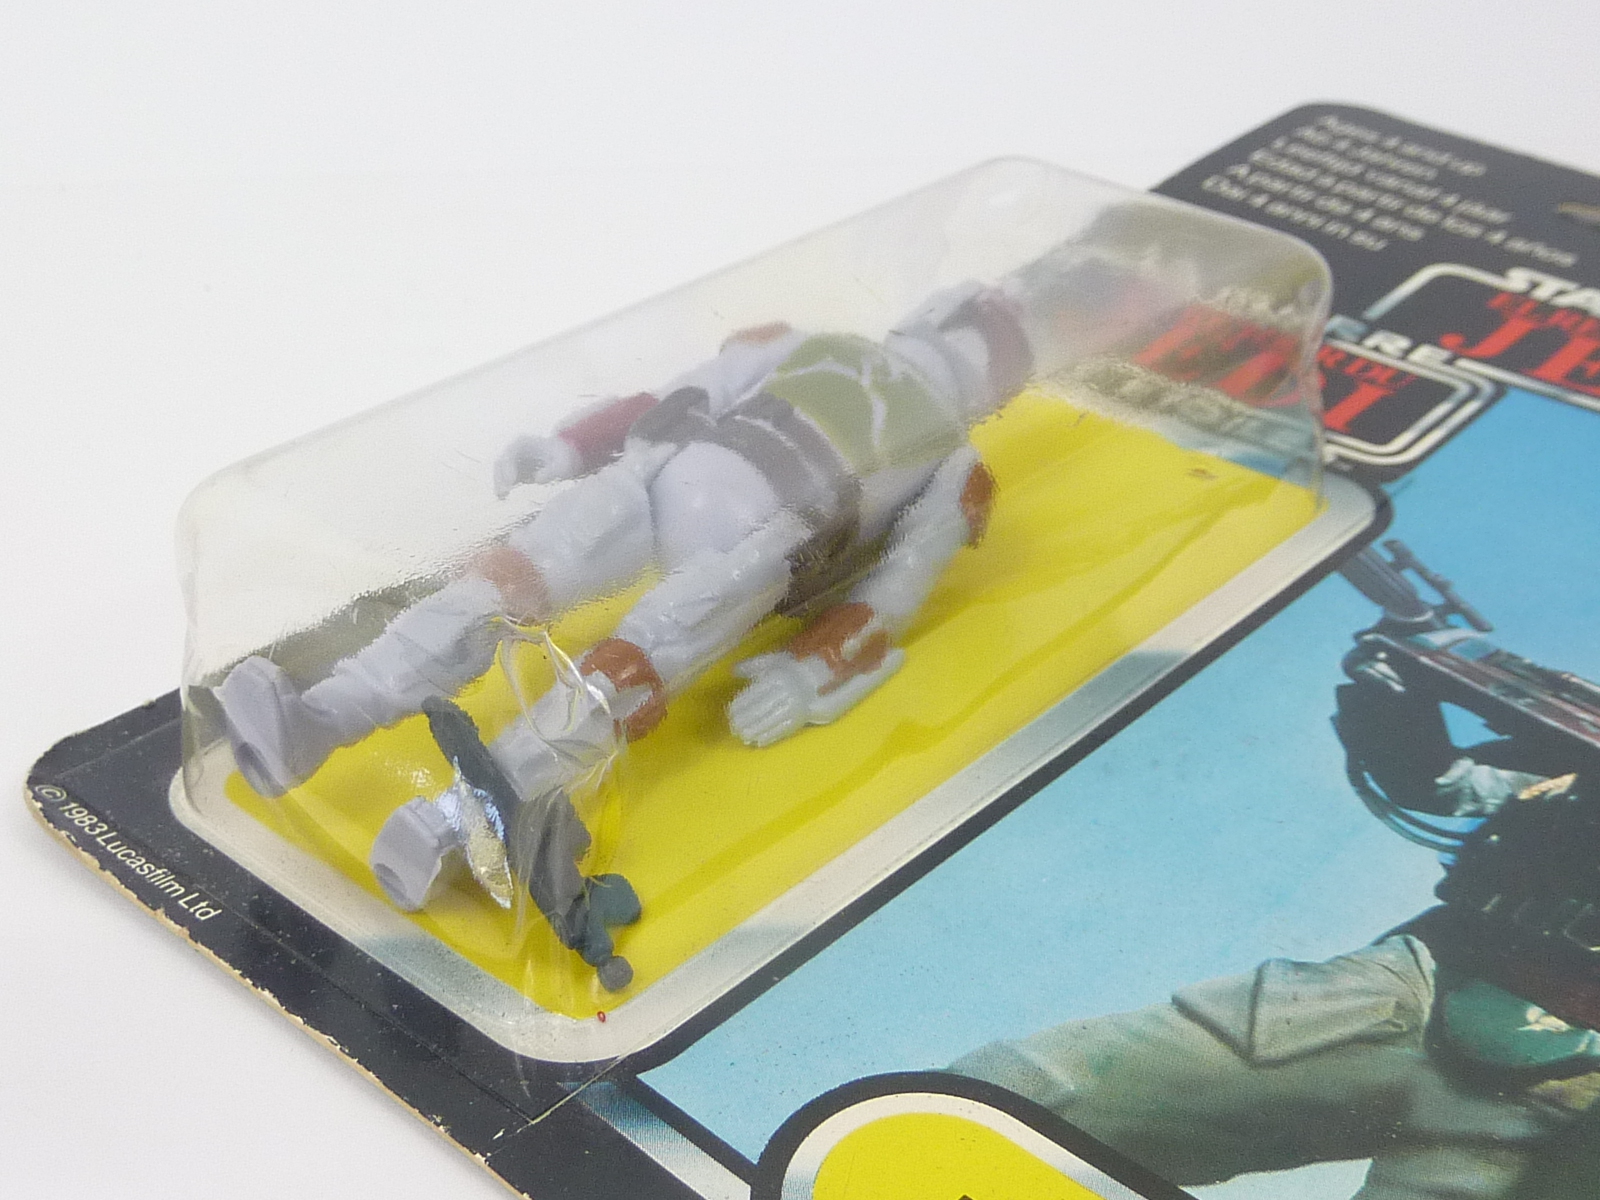 Palitoy of General Mills, Star Wars The Return of the Jedi, Trilogo, Boba Fett figure. - Image 6 of 10